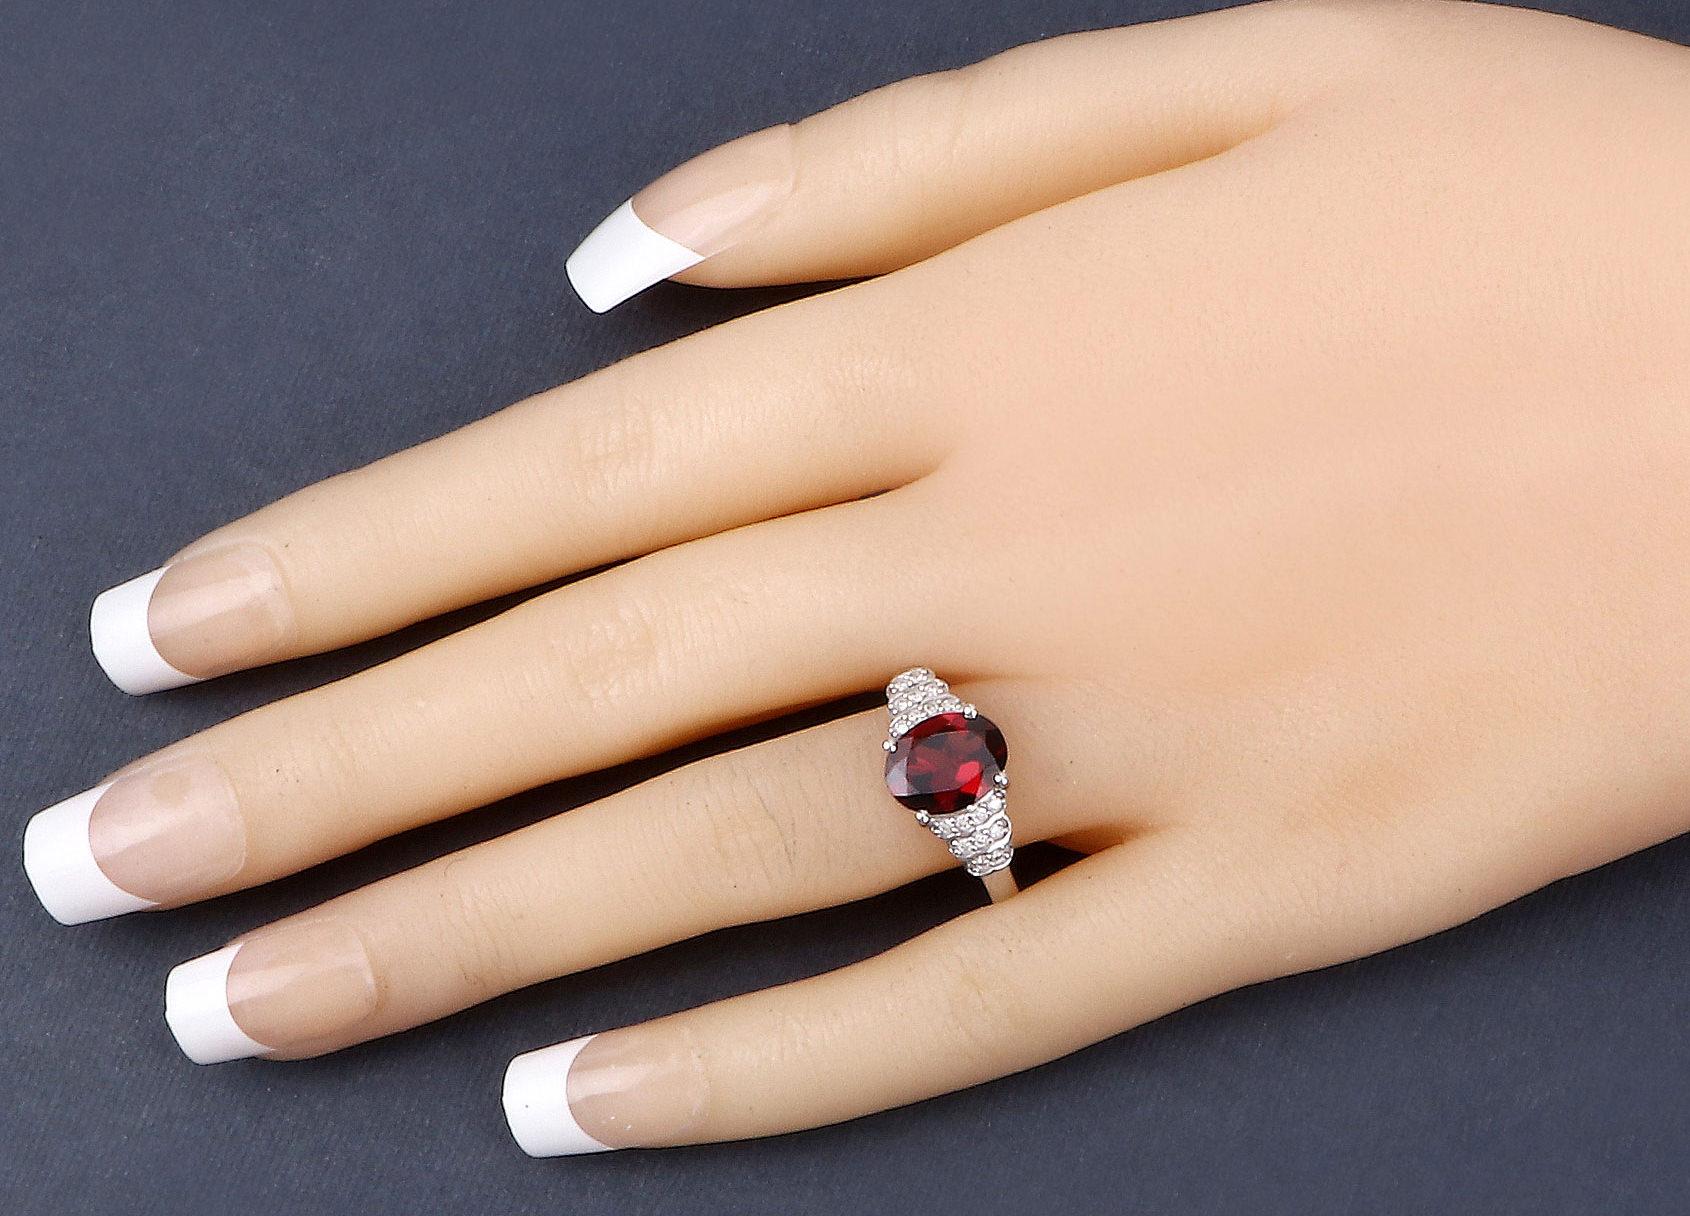 It comes with the appraisal by GIA GG/AJP
Rhodolite Garnet = 2.75 Carat ( 10 x 8 mm )
Cut: Oval
Diamonds = 0.15 Carats
Diamonds Quantity: 18
Metal: 14K White Gold
Ring Size: 7* US
*It can be resized complimentary